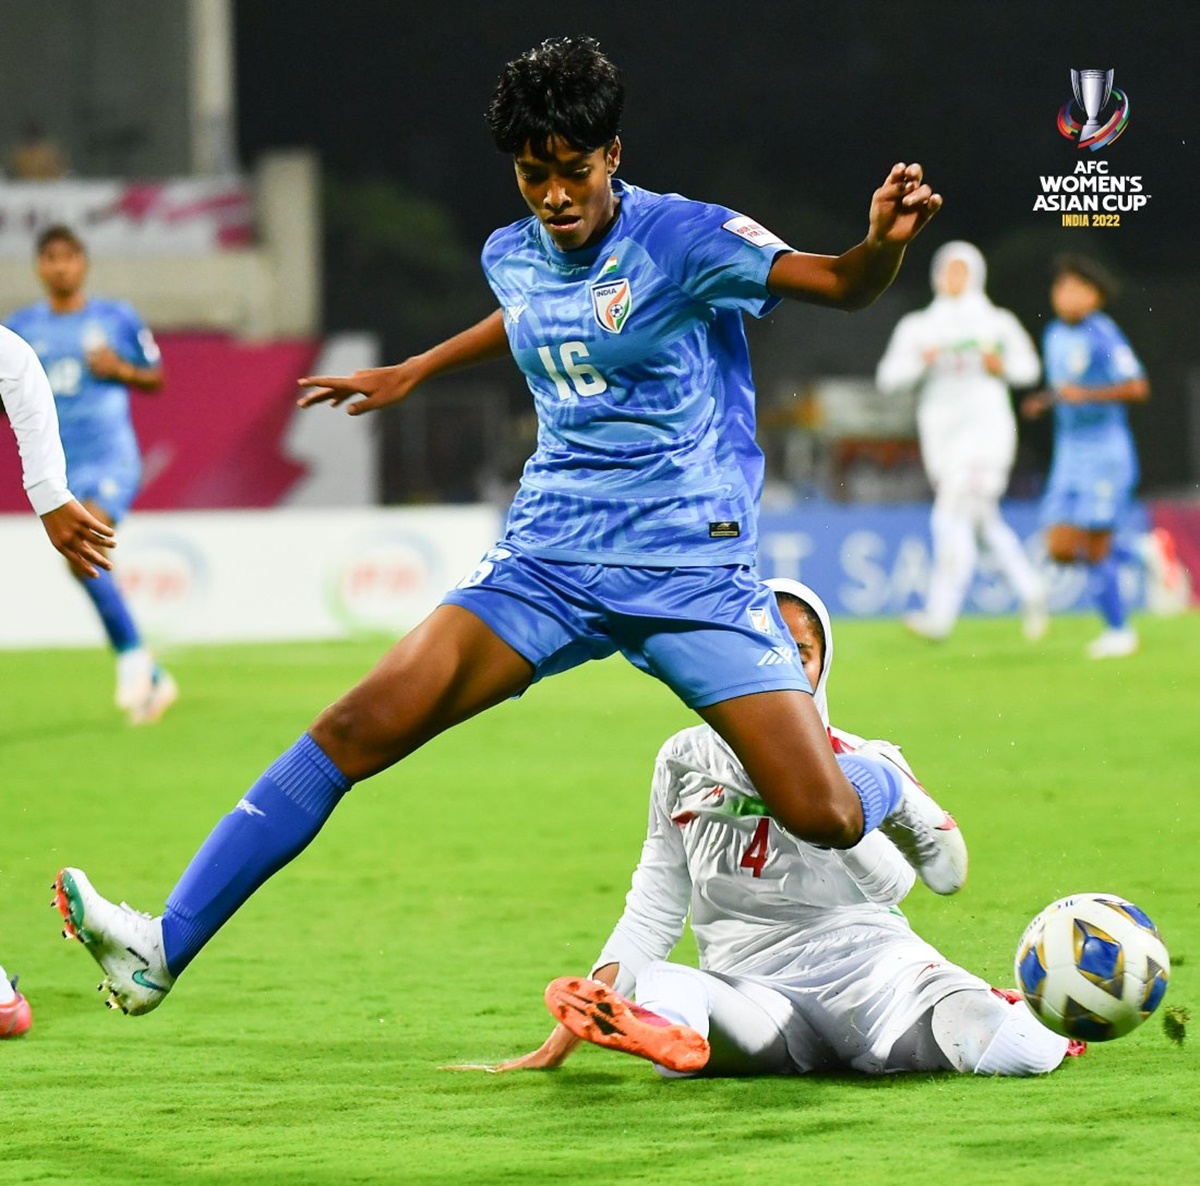 The AIFF Woman Footballer of the Year for the 2021-22 season, Manisha Kalyan became the first Indian to score a goal in the AFC Women’s Club Championship. 